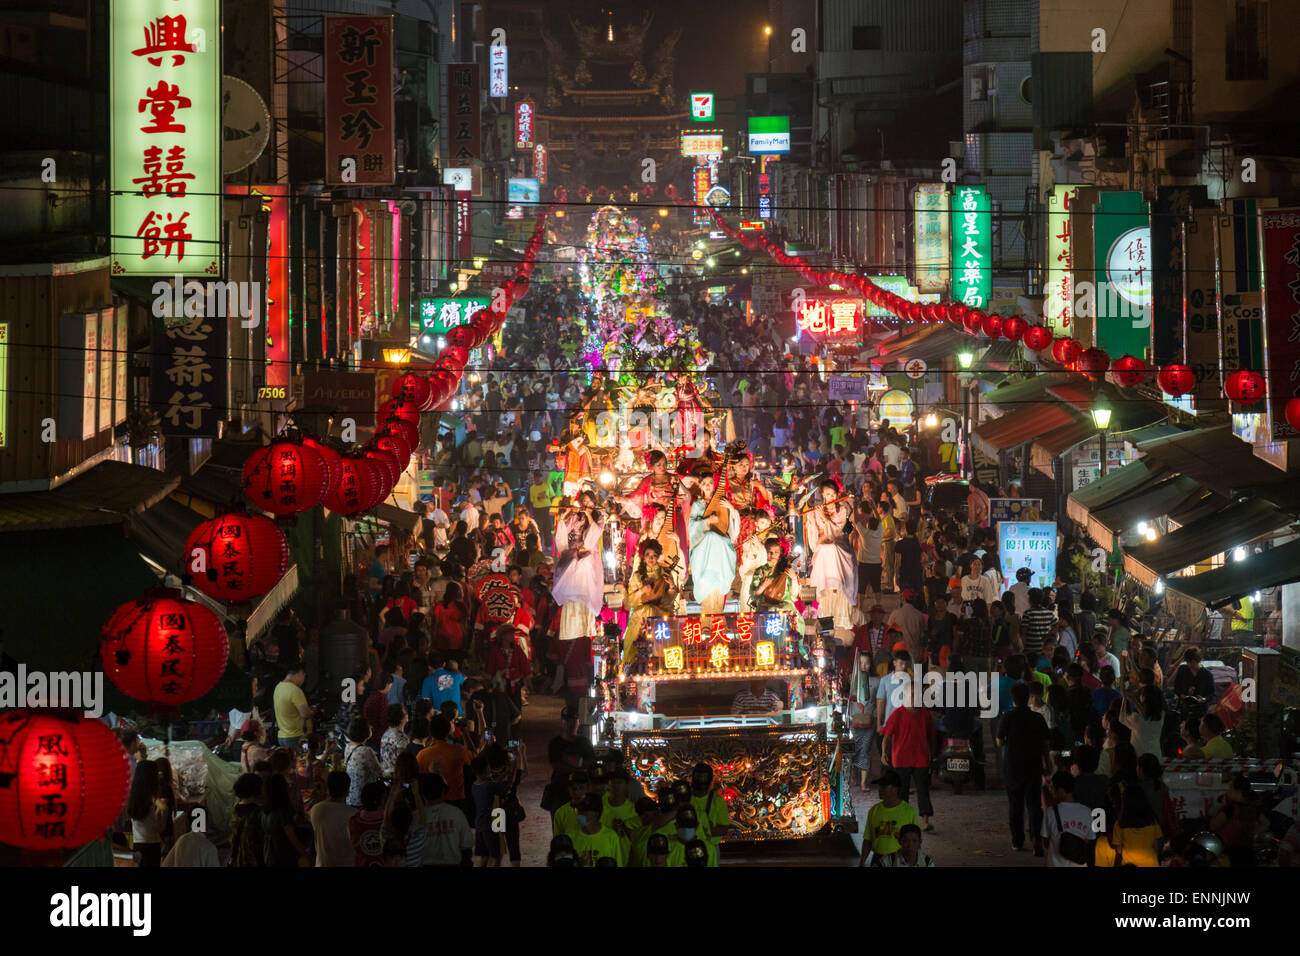 A parade of brightly lit floats parade in front of Chaotian Temple in Beigang, Taiwan Stock Photo